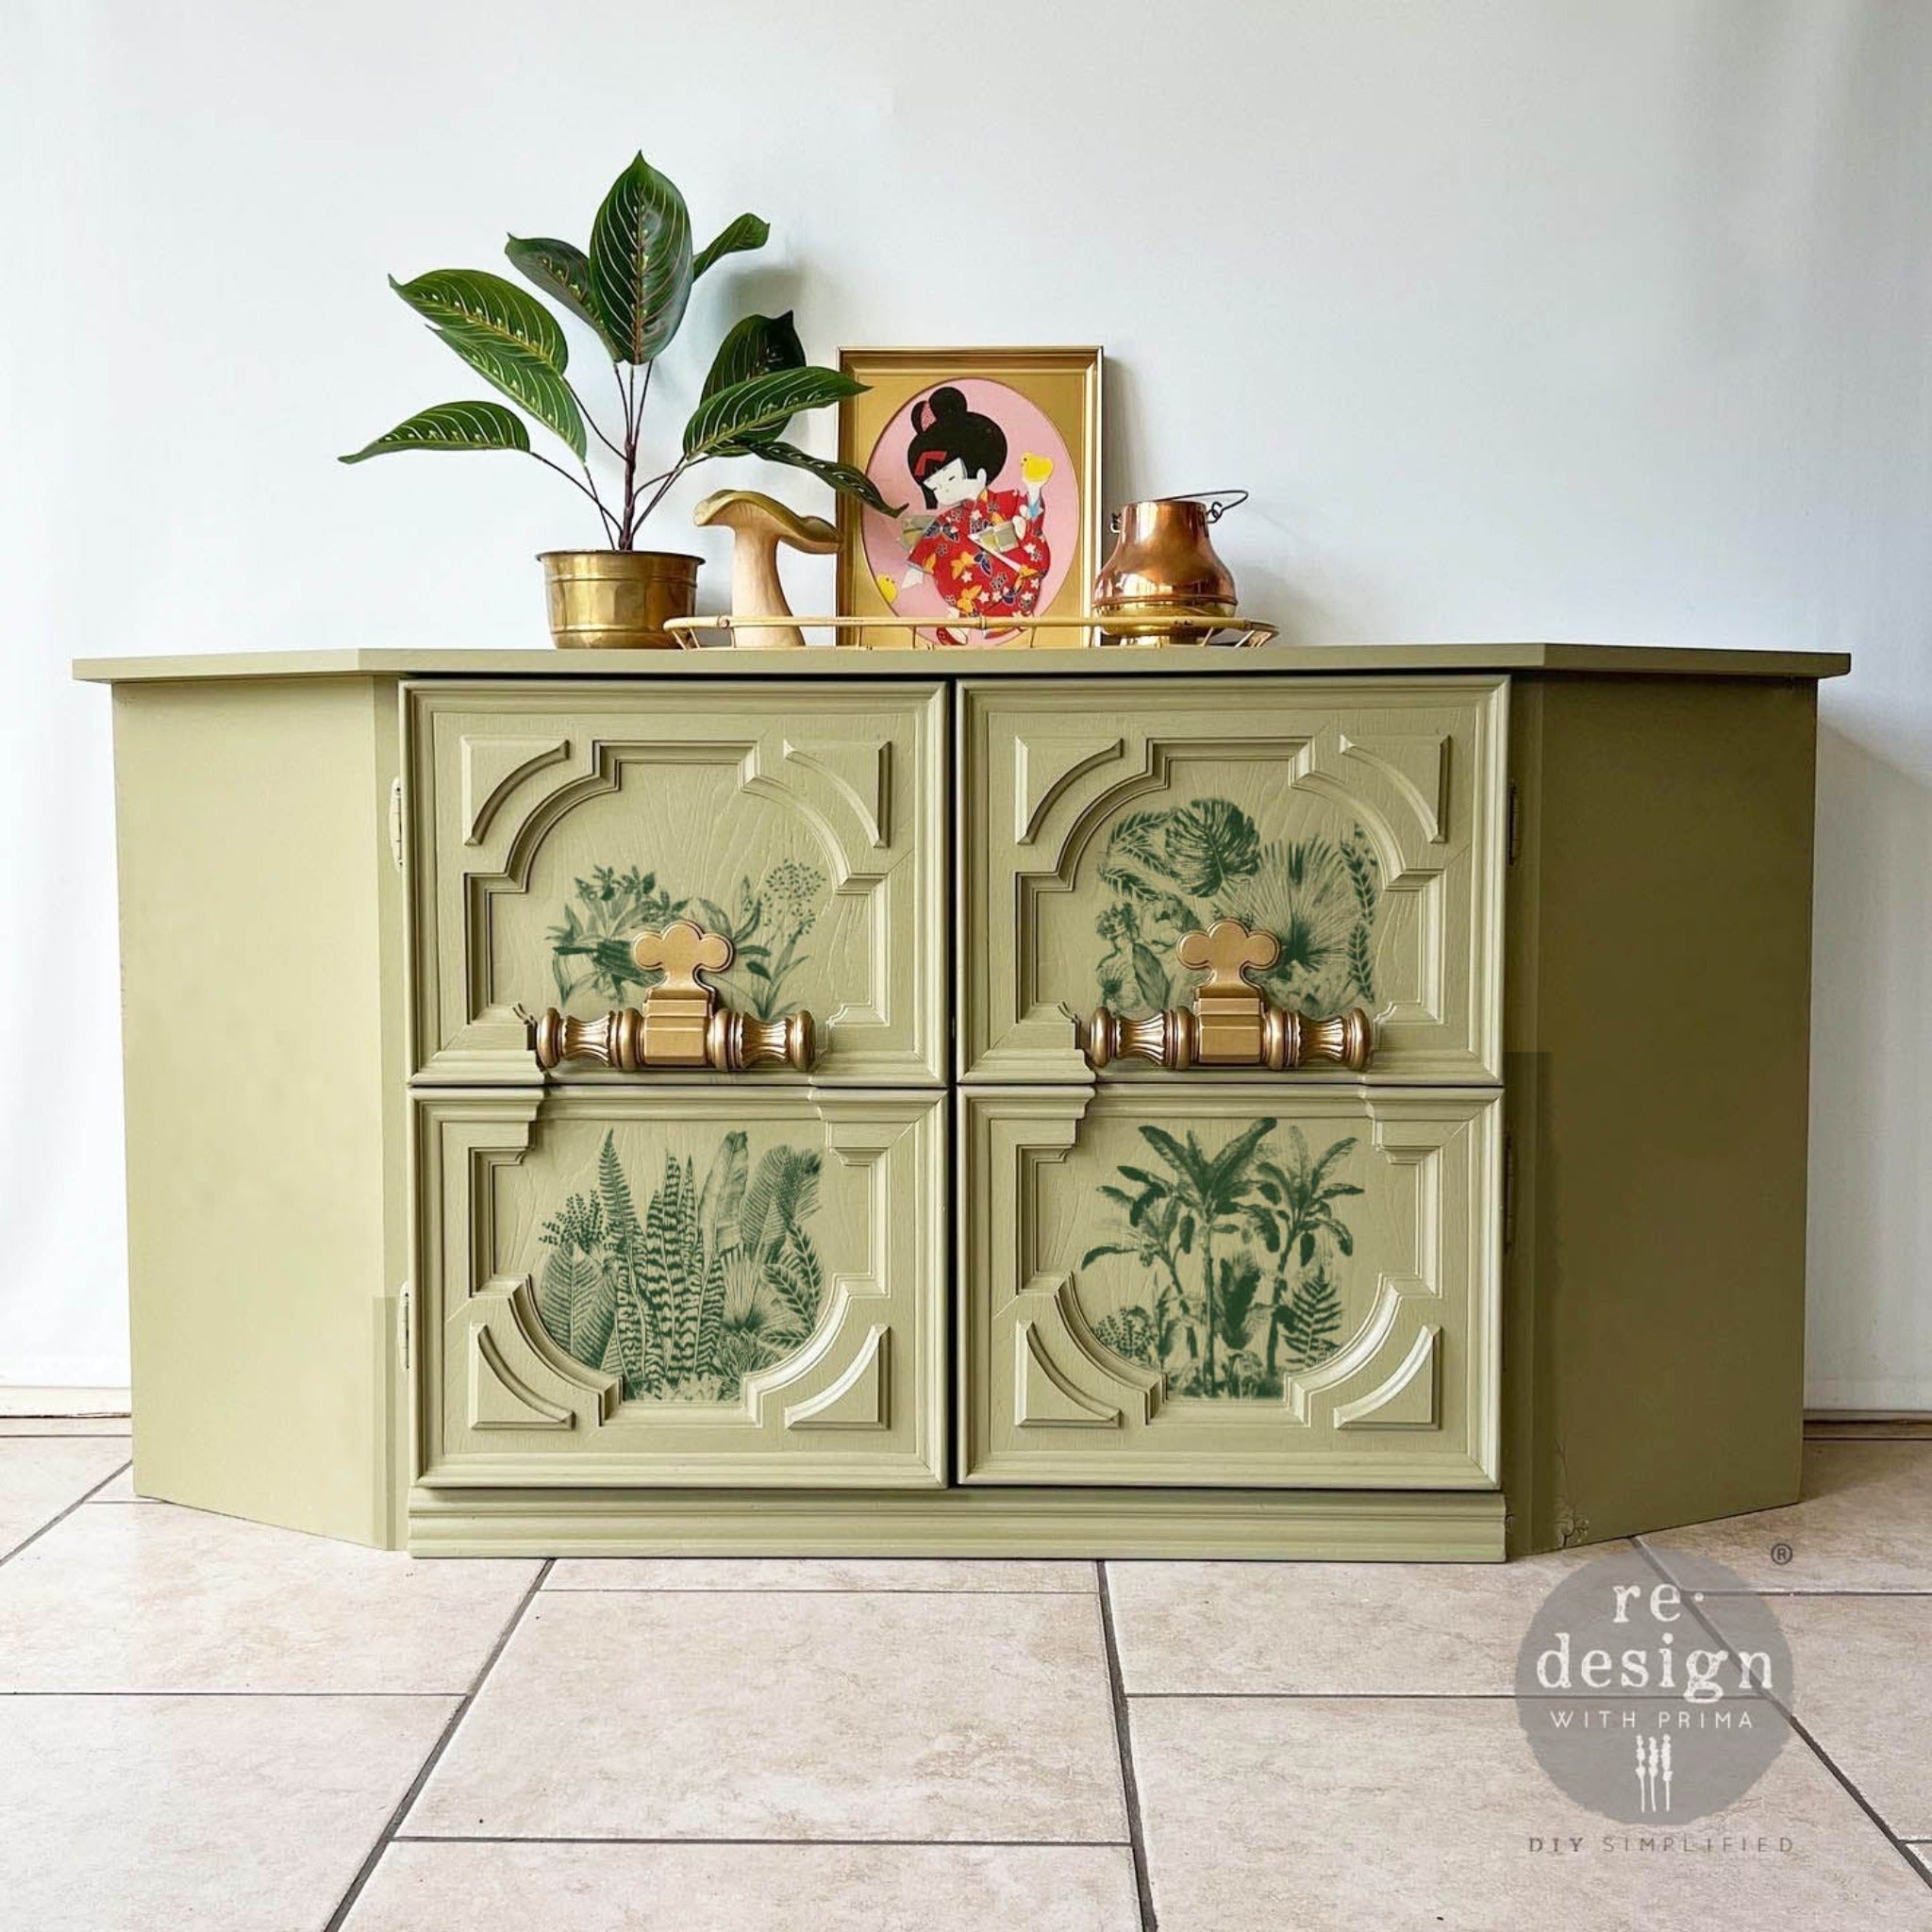 A TV console table is painted light sage green and features ReDesign with Prima's Magic Jungle small transfer on its 2 doors.